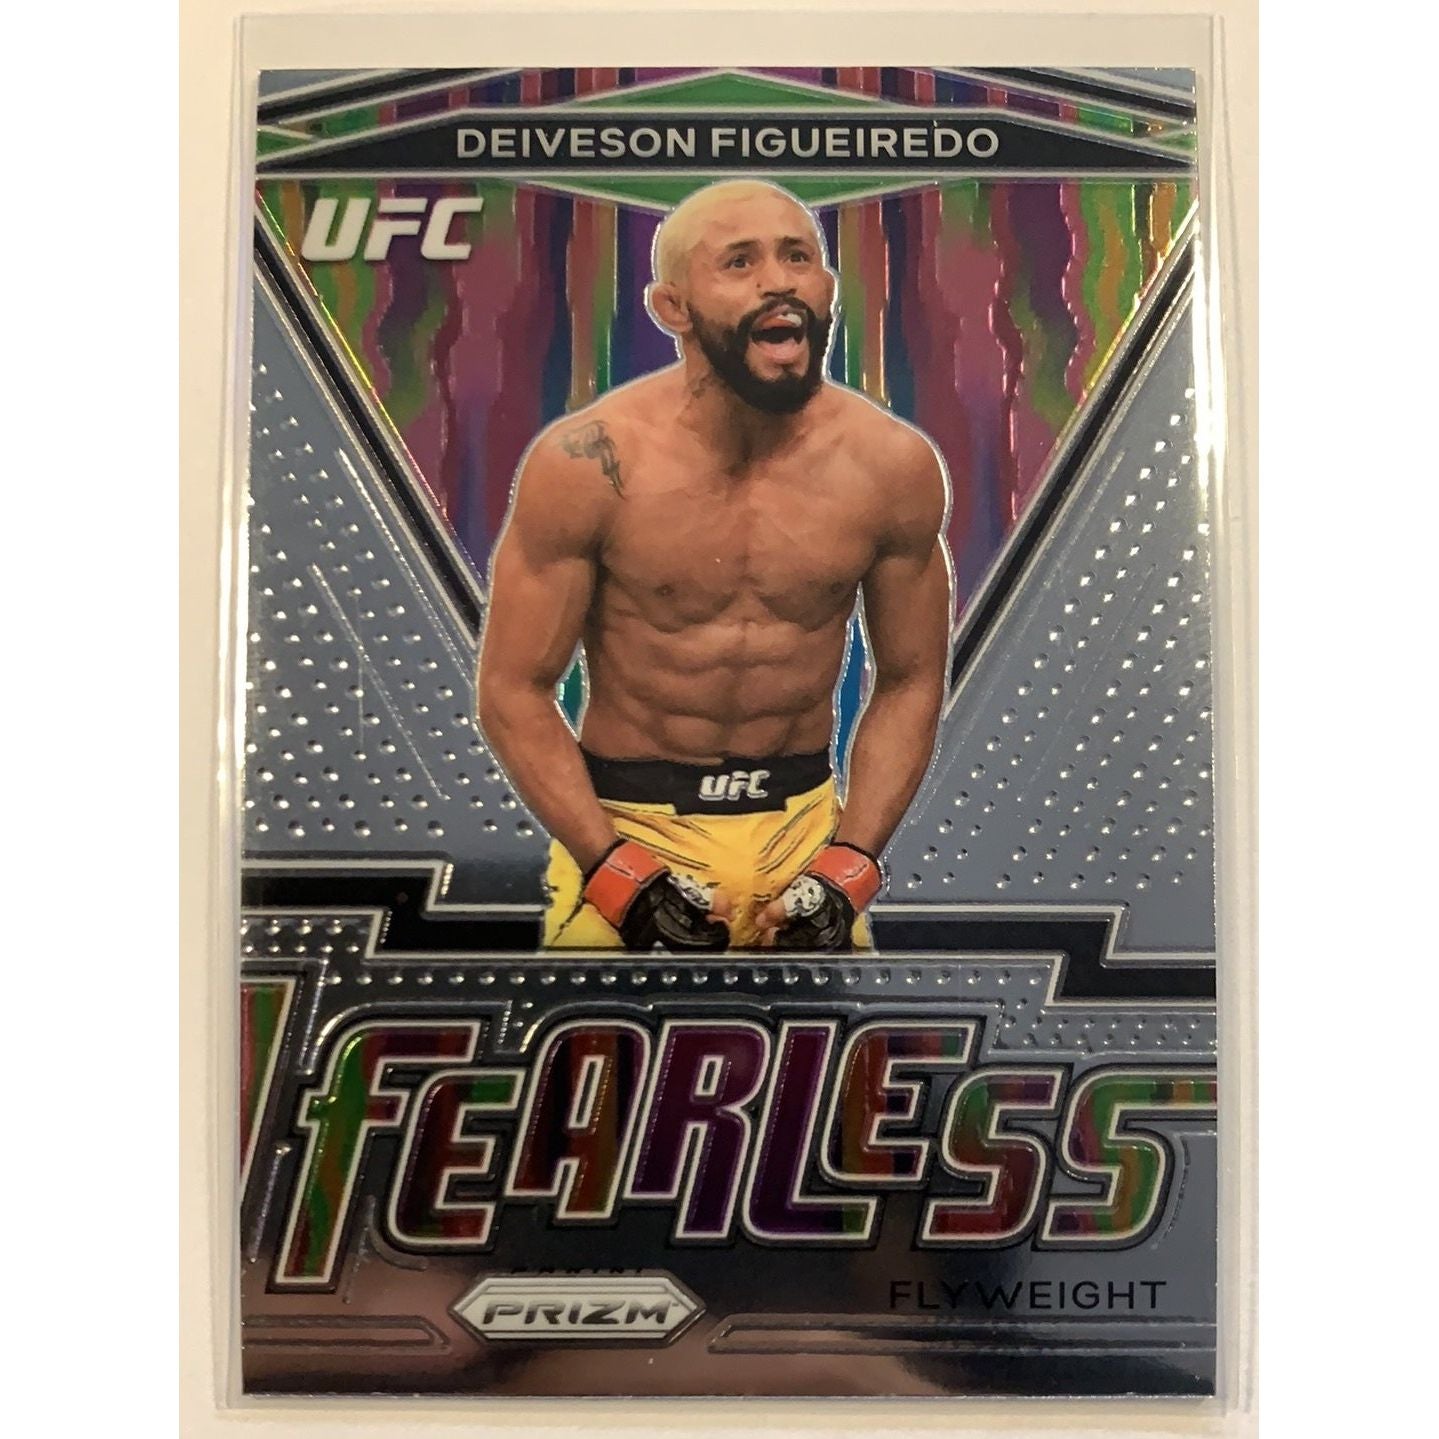  2021 Panini Prizm Deiveson Figueiredo Fearless Insert  Local Legends Cards & Collectibles